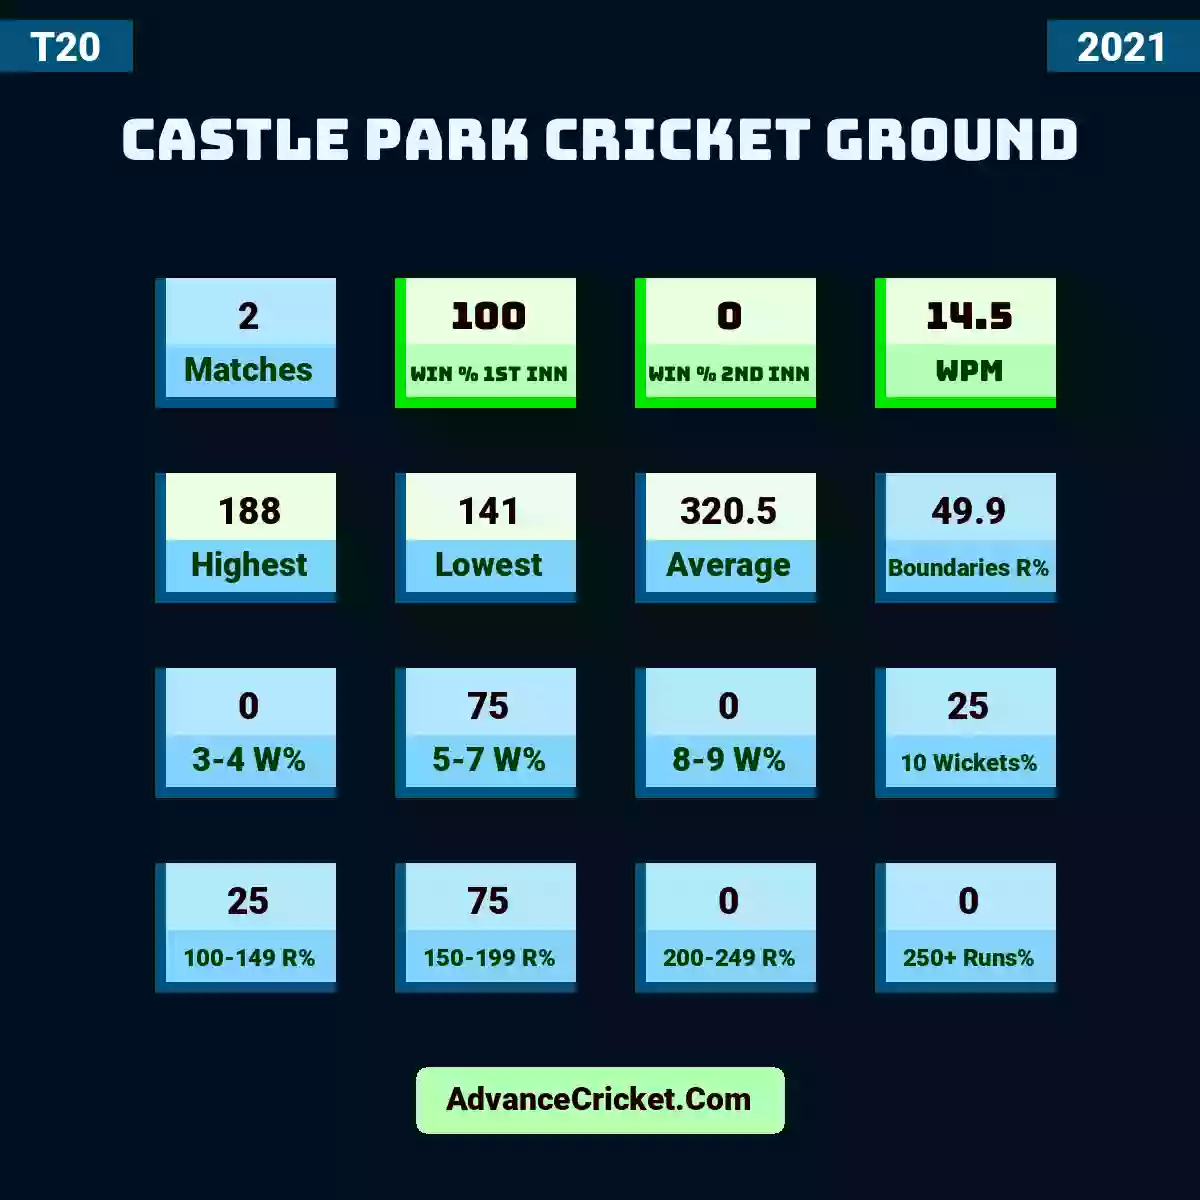 Image showing Castle Park Cricket Ground with Matches: 2, Win % 1st Inn: 100, Win % 2nd Inn: 0, WPM: 14.5, Highest: 188, Lowest: 141, Average: 320.5, Boundaries R%: 49.9, 3-4 W%: 0, 5-7 W%: 75, 8-9 W%: 0, 10 Wickets%: 25, 100-149 R%: 25, 150-199 R%: 75, 200-249 R%: 0, 250+ Runs%: 0.